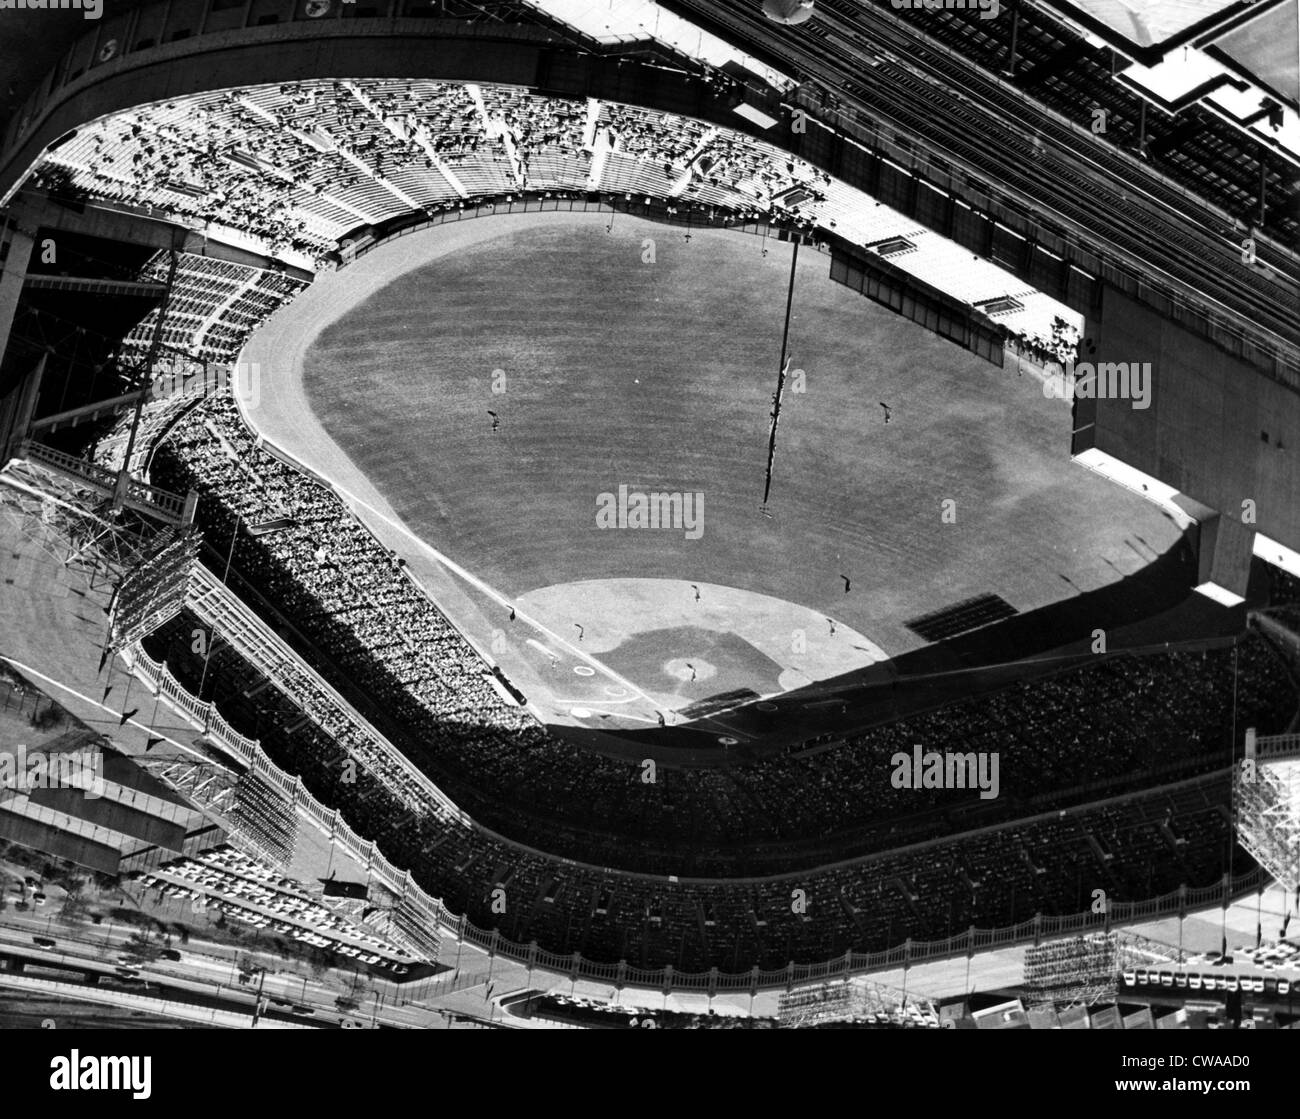 Yankee Stadium on labor day. 20,000 fans are watching the Yankees play the Baltimore Orioles, New York, September 6, 1965. Stock Photo